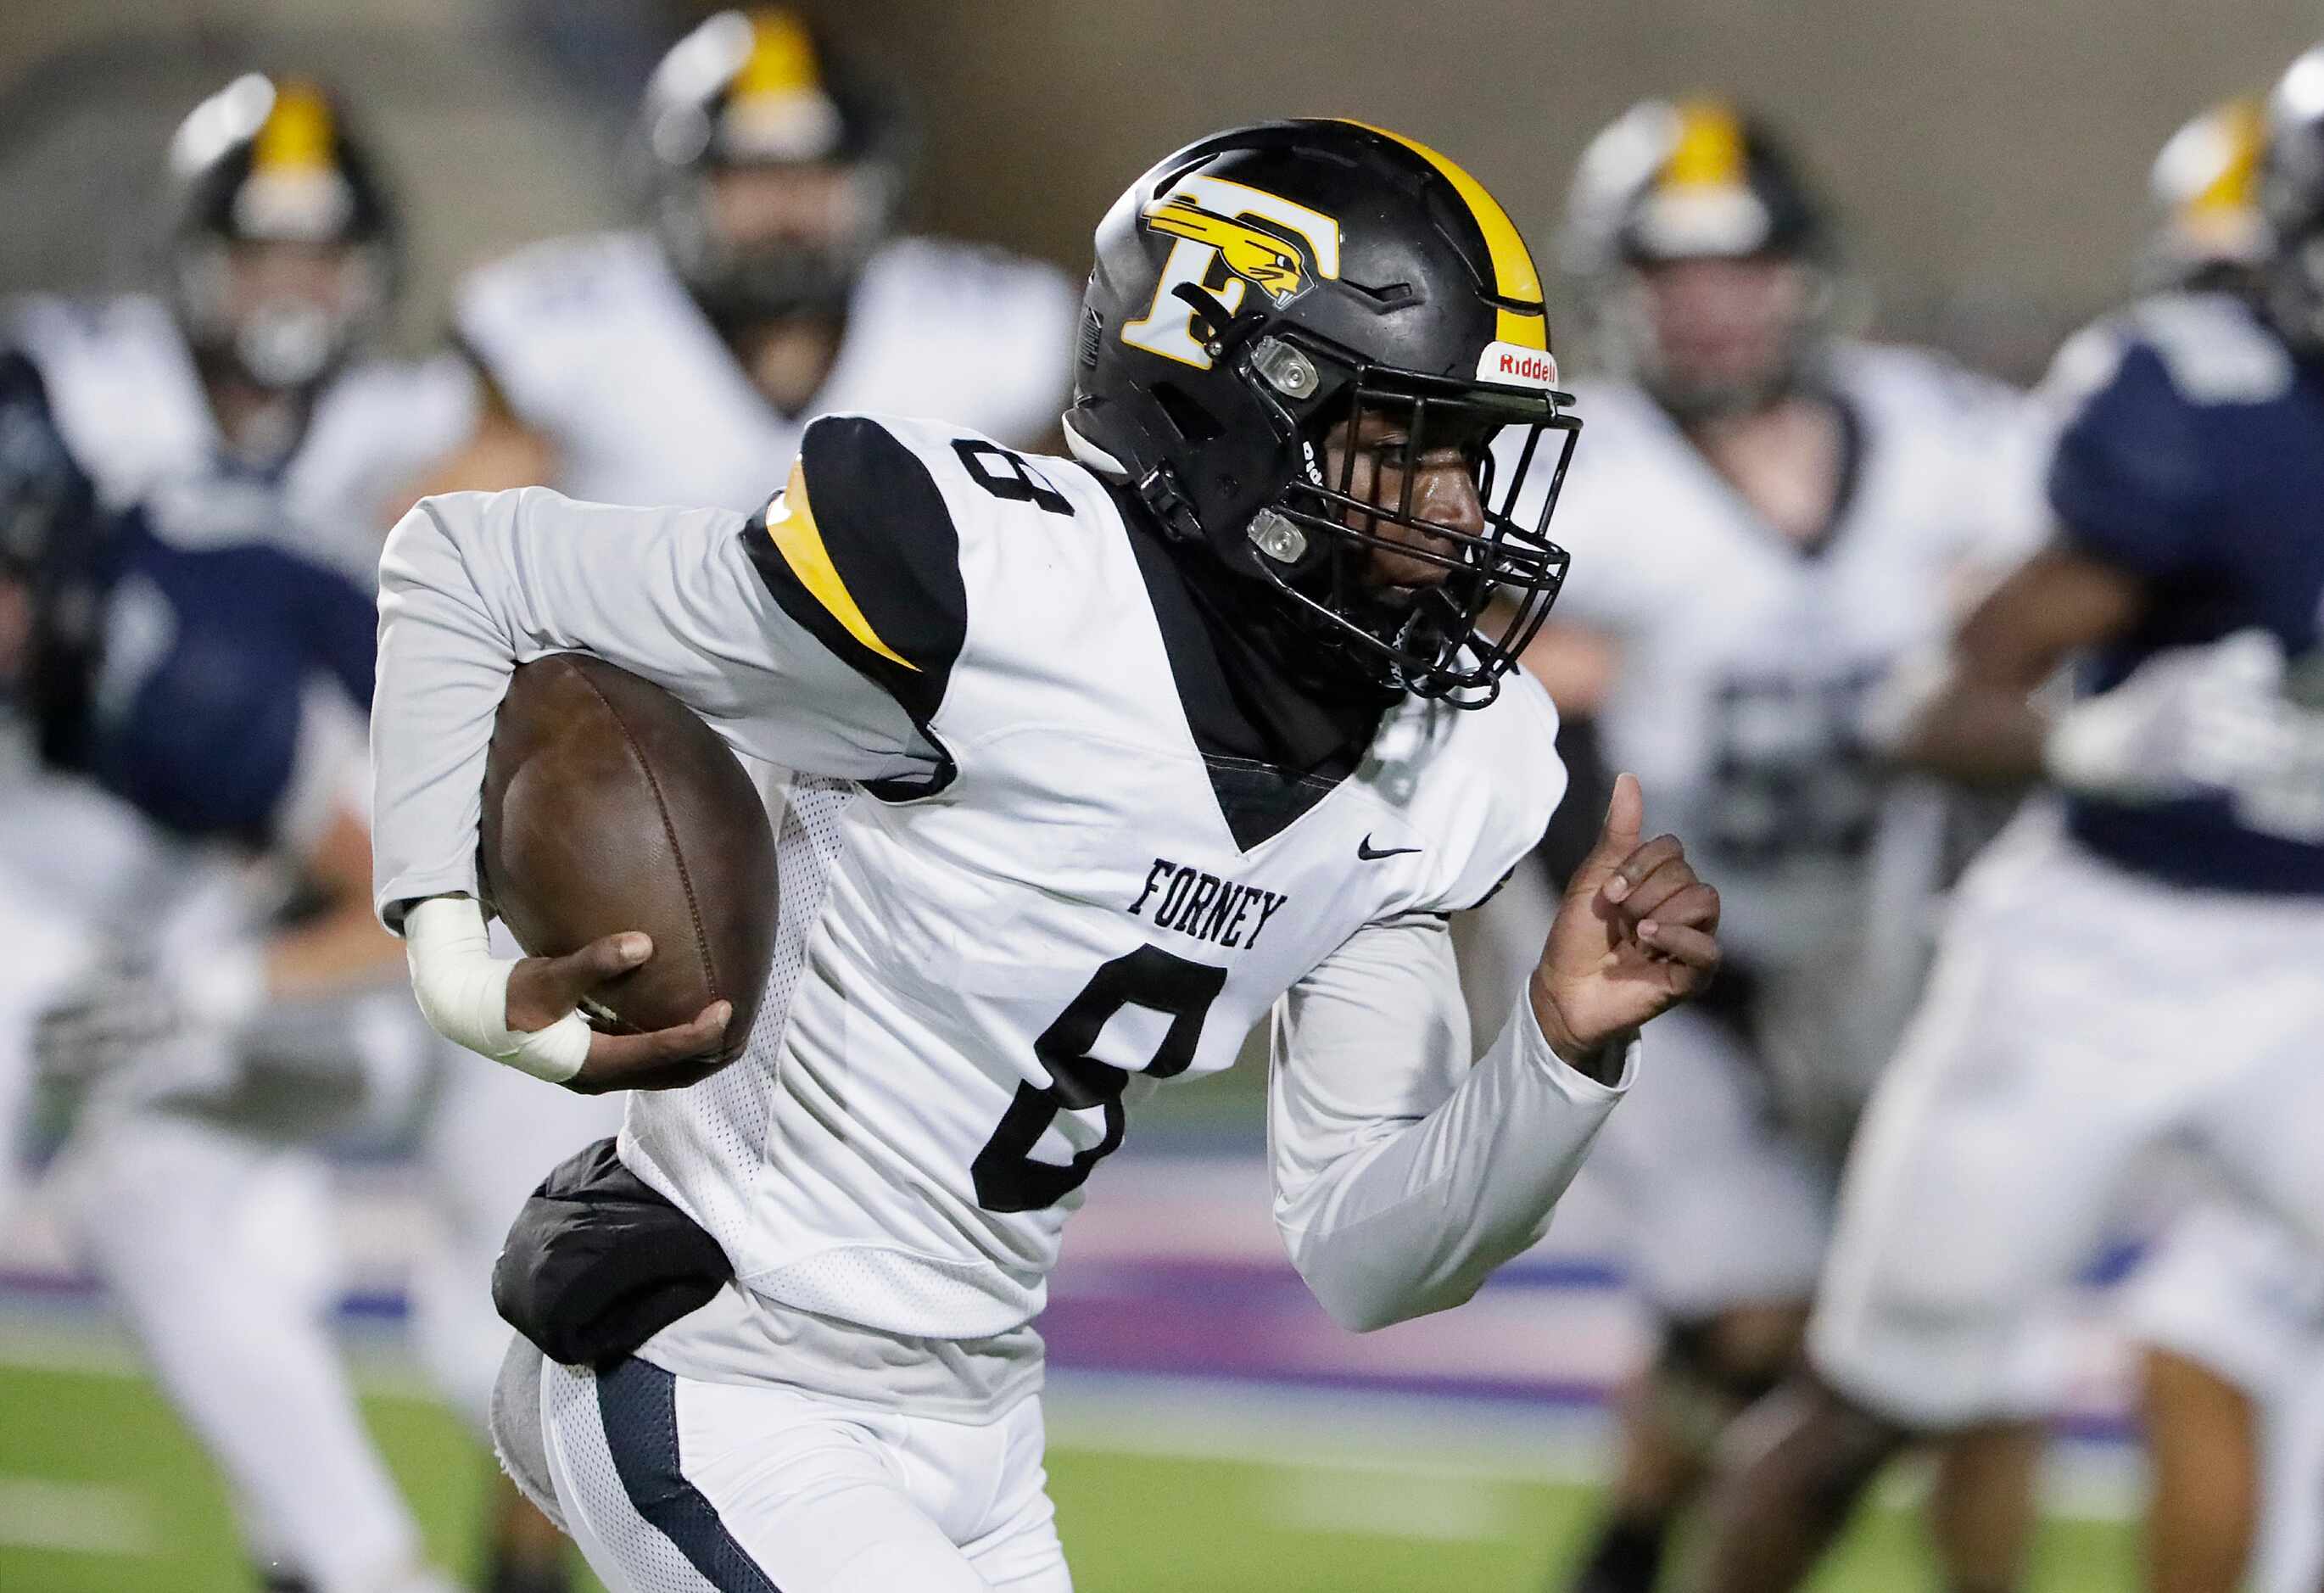 Forney High School place holder for an extra point attempt Alijah Merkson (8) sprints for...